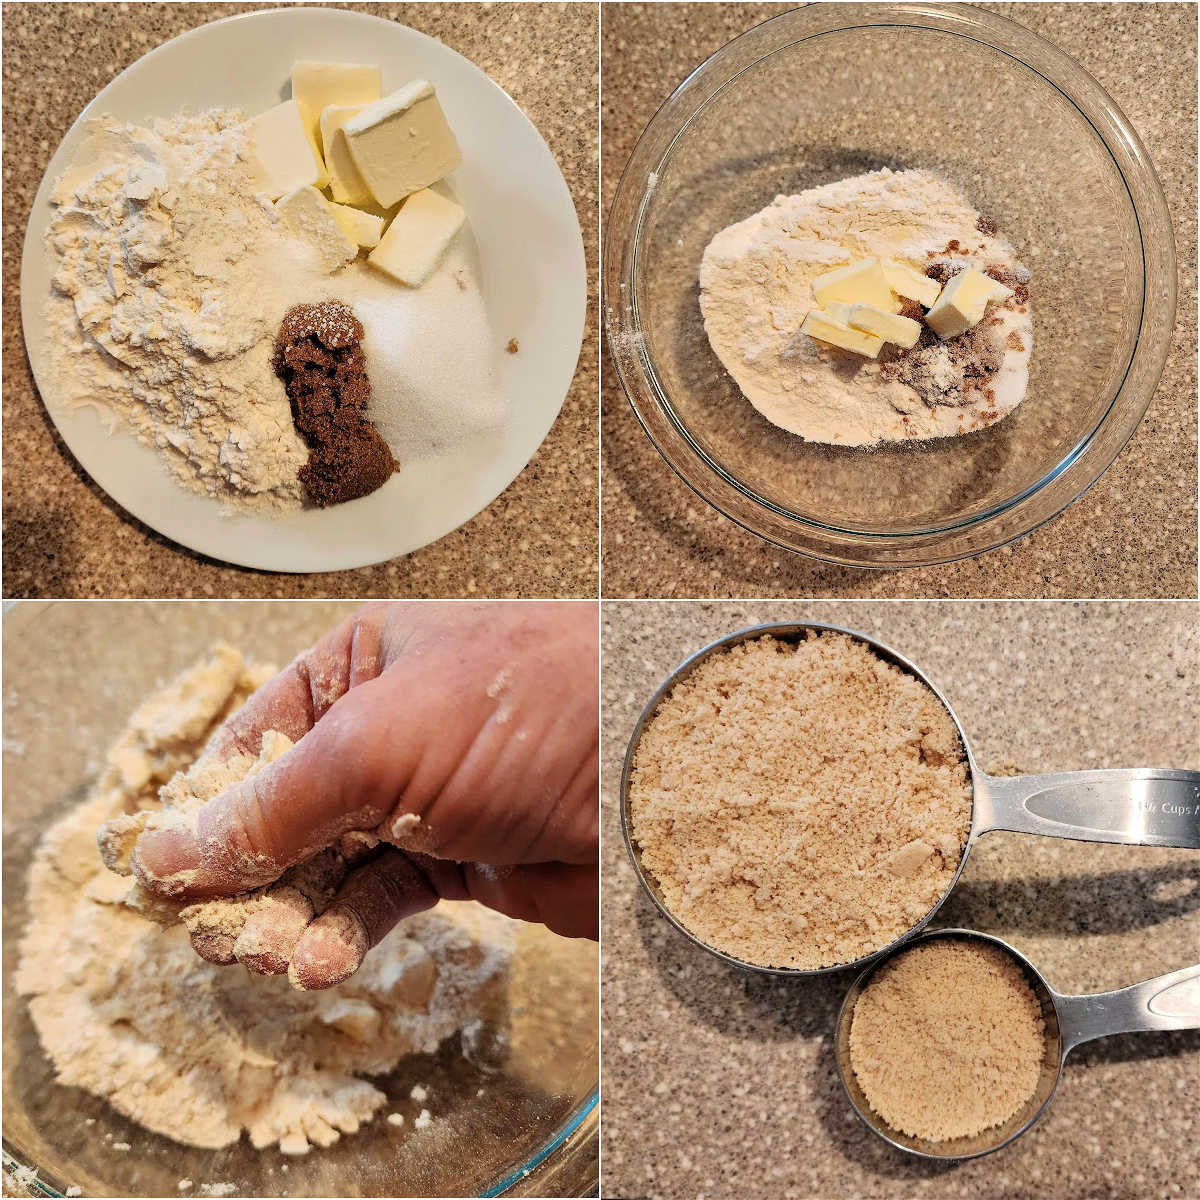 A collage of four overhead images showing the ingredients for making basic streusel, those ingredients in a glass bowl, a hand rubbing the ingredients together, and the finished streusel in 2 metal measuring cups to show the approximate volume of the recipe.